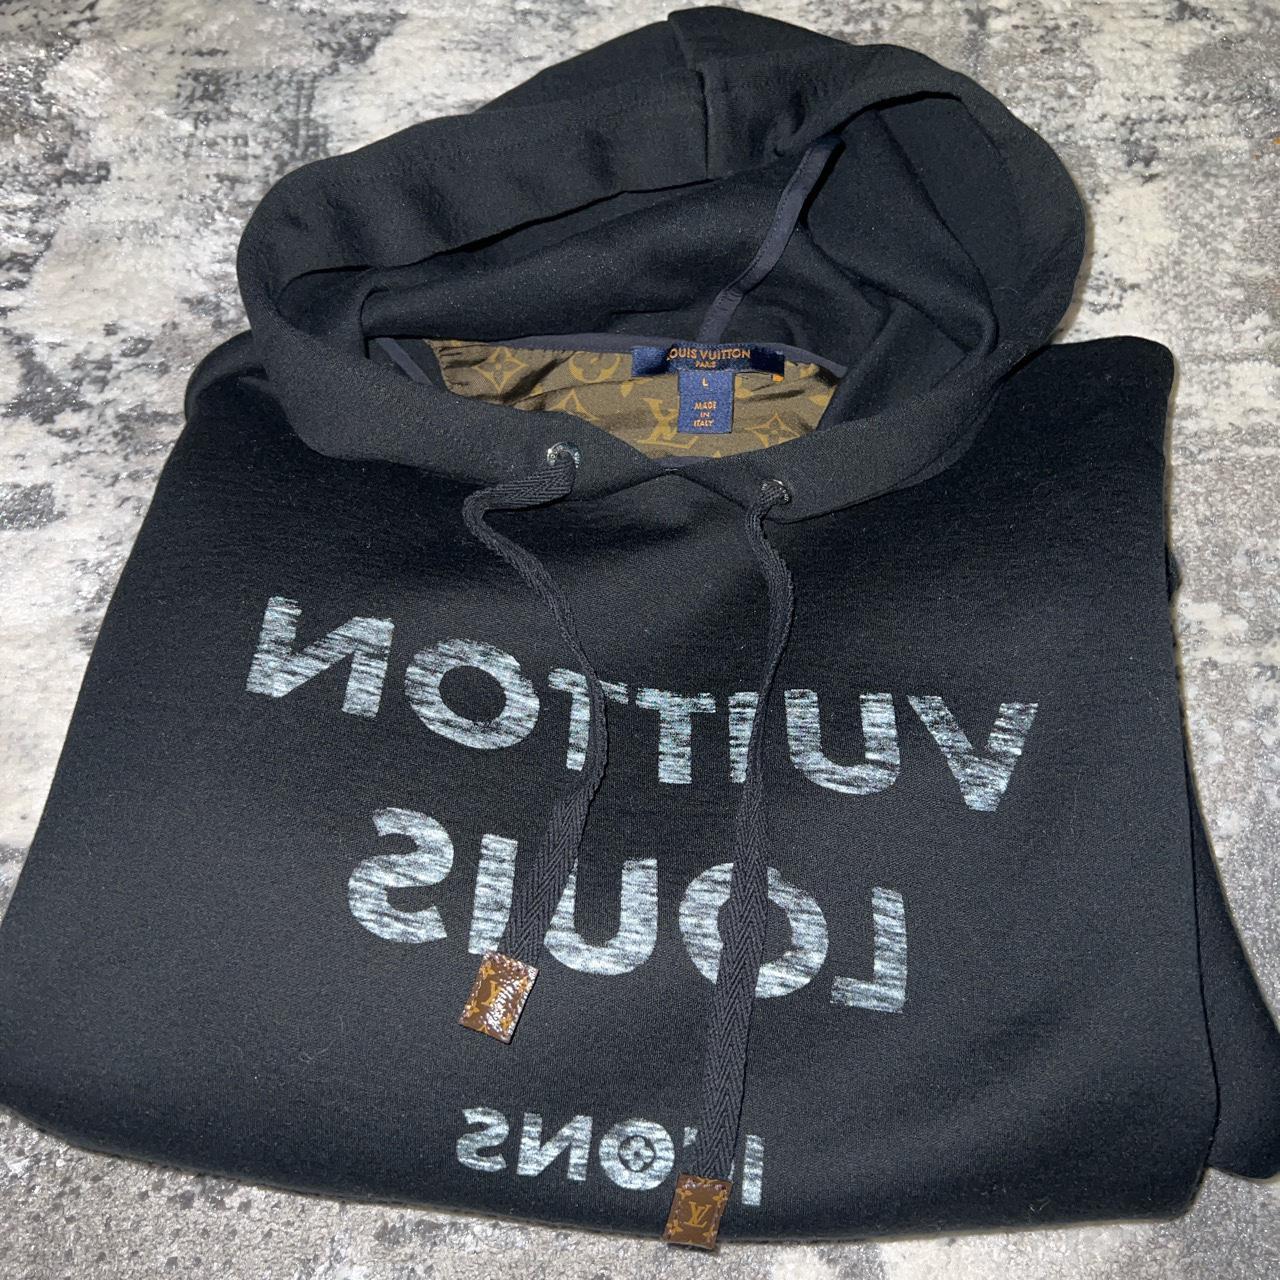 Louis Vuitton hoodie. Worn only w couple times. Been - Depop